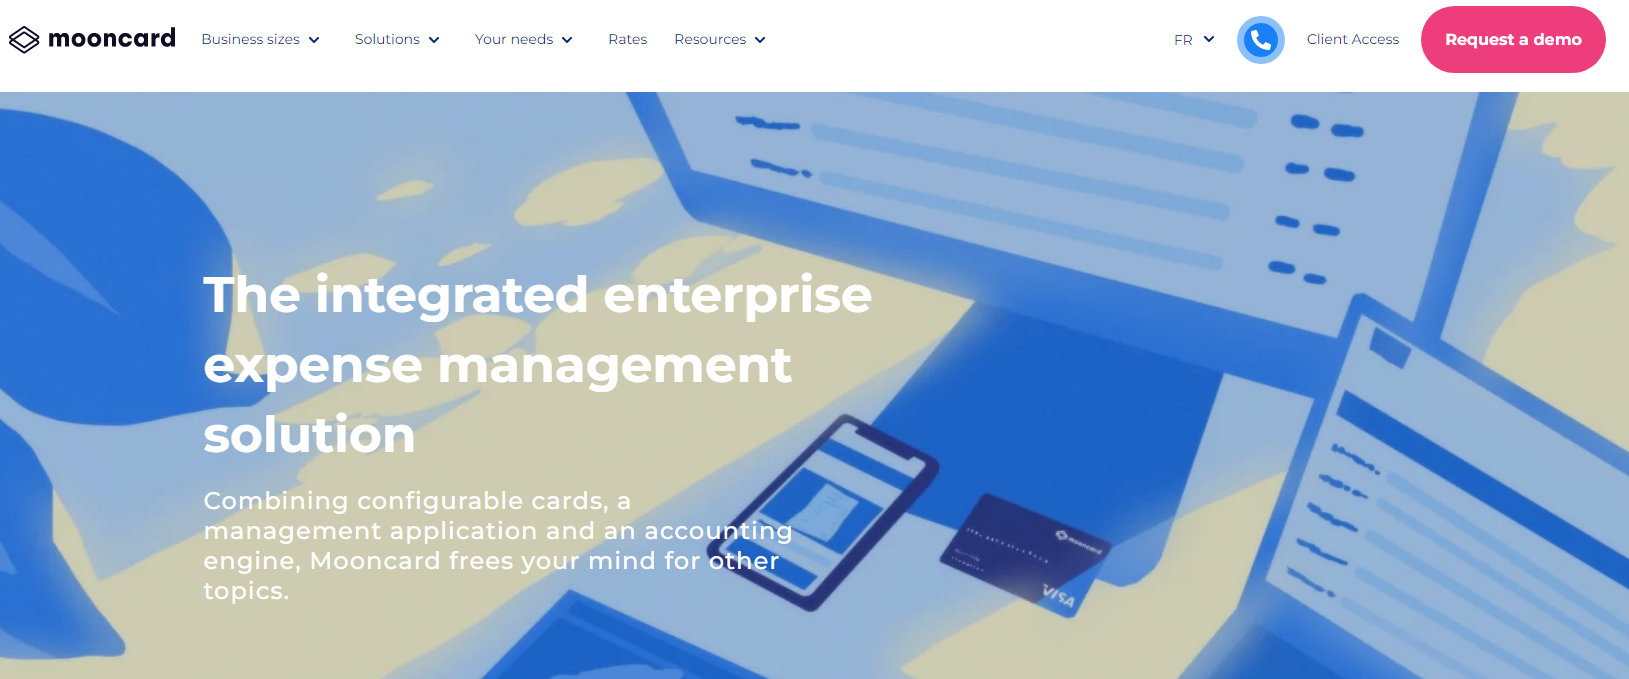 Mooncard Raises $40.7 Million in Series C Funding Round to Revolutionize Expense Management for Businesses.